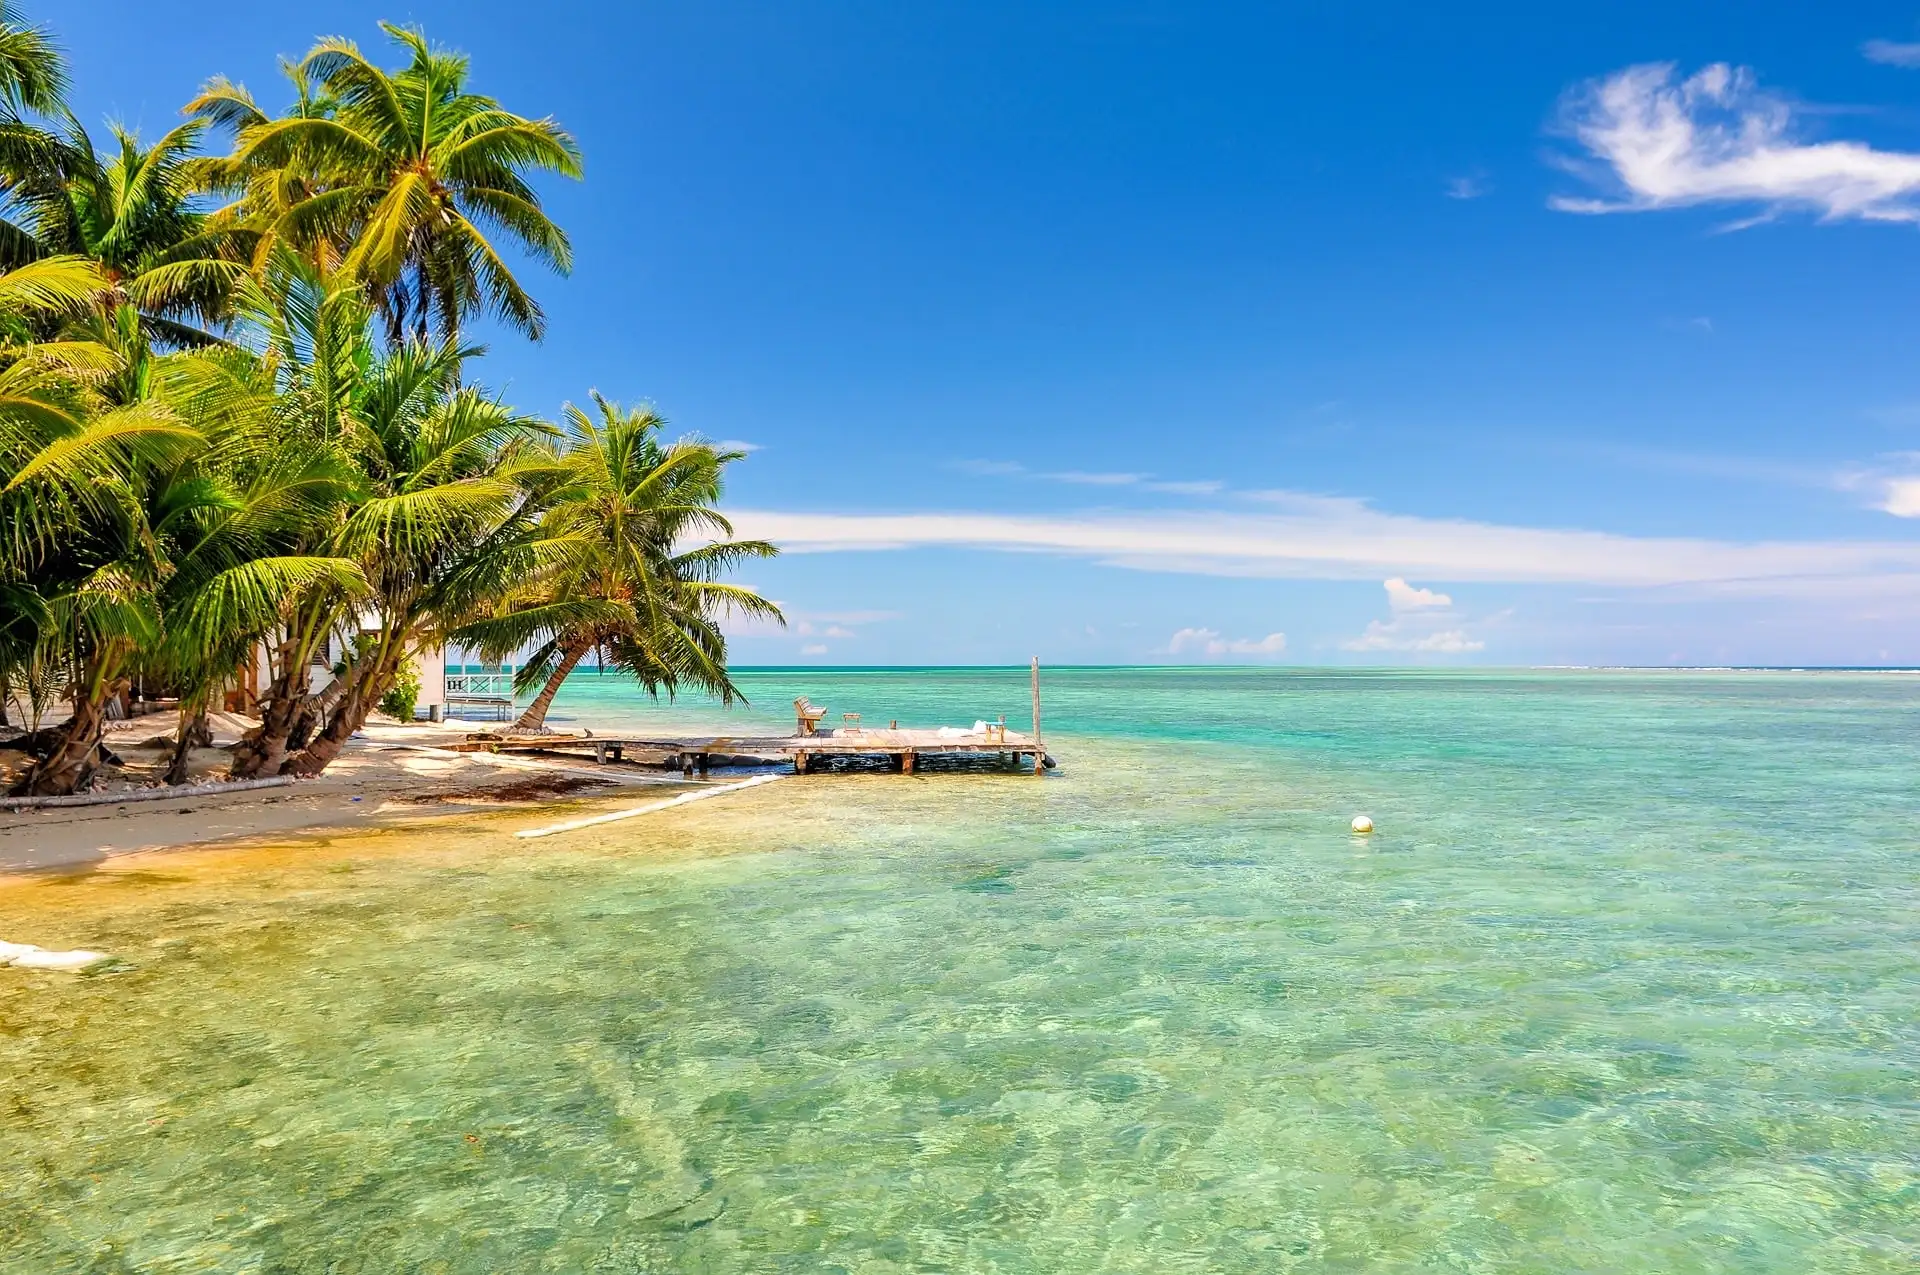 Tobacco Caye – Get to Know Belize's Off-Beat, Off-Grid Island Paradise